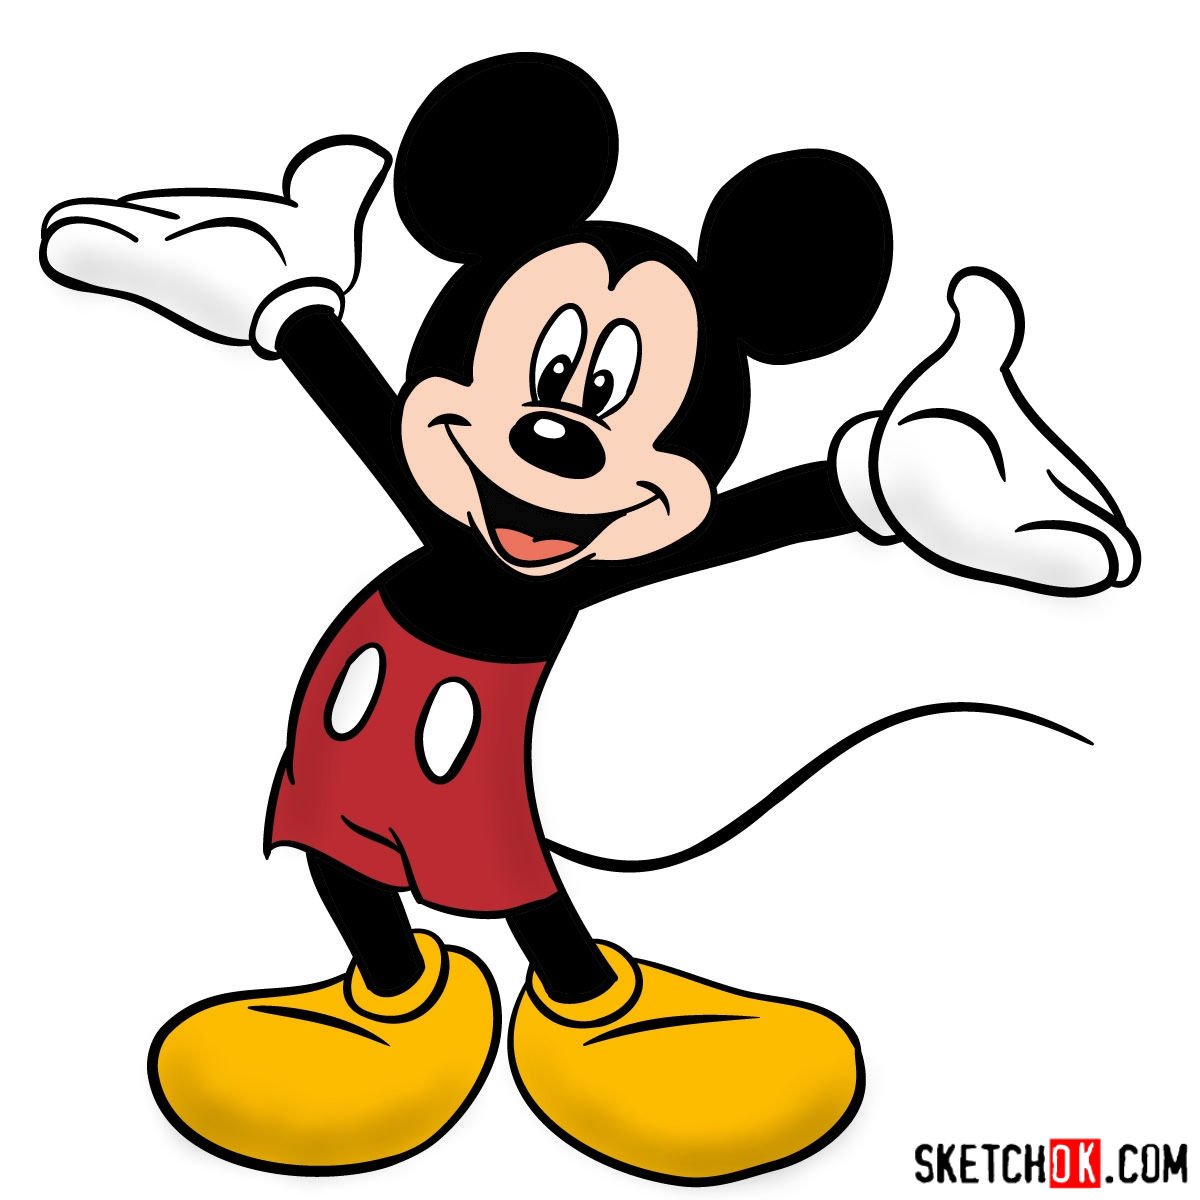 How To Draw Mickey Mouse Easy @ Howtodraw.pics-vachngandaiphat.com.vn